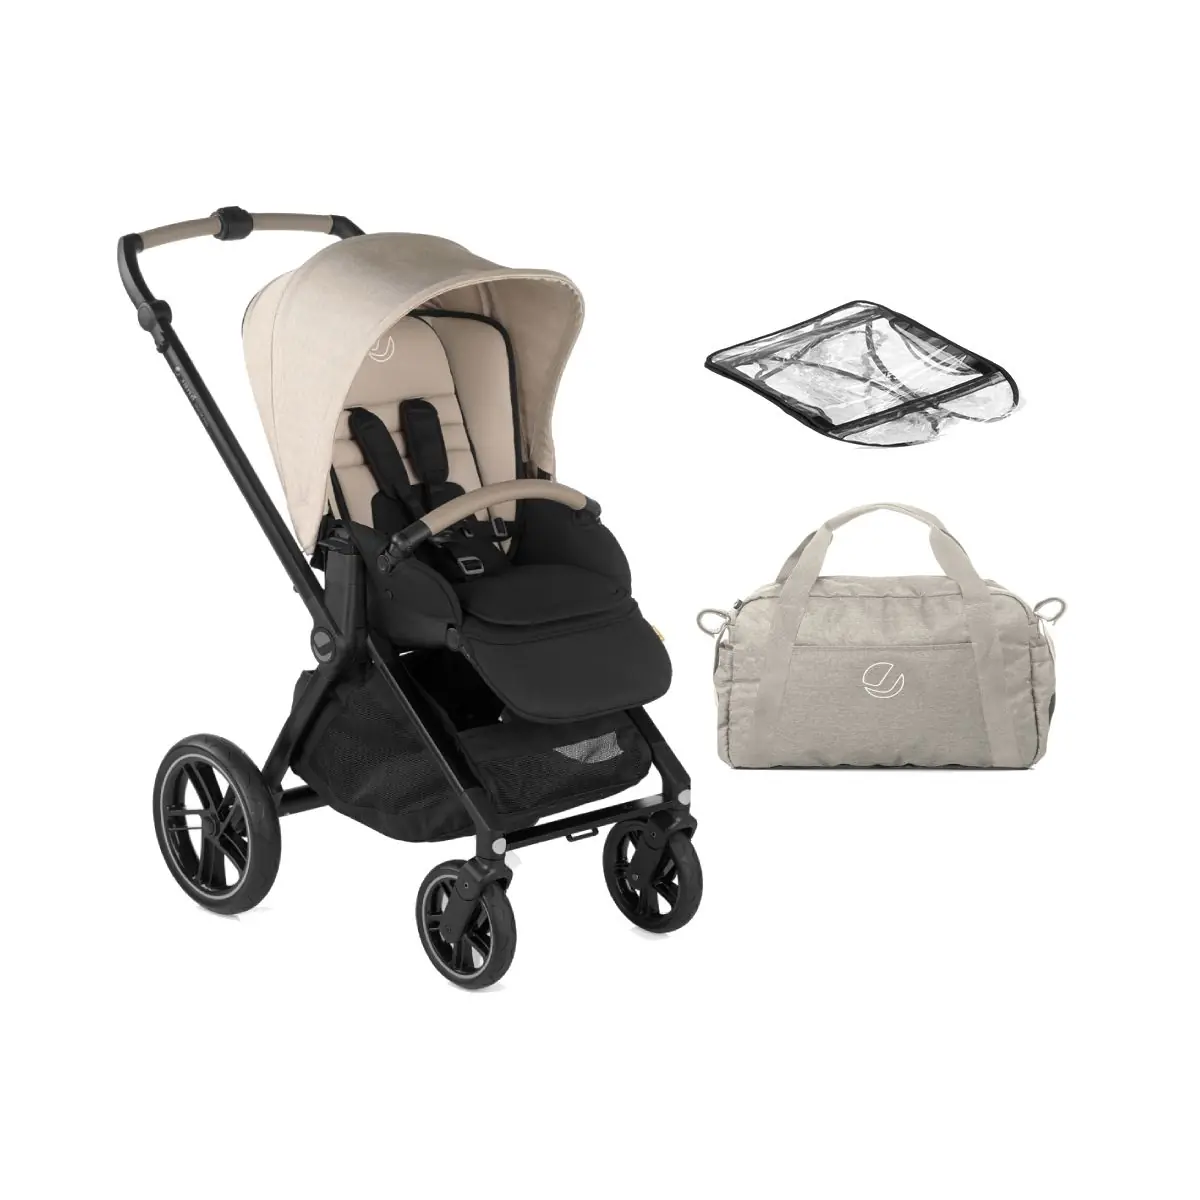 Jane Muum Pro travel system review - Which?